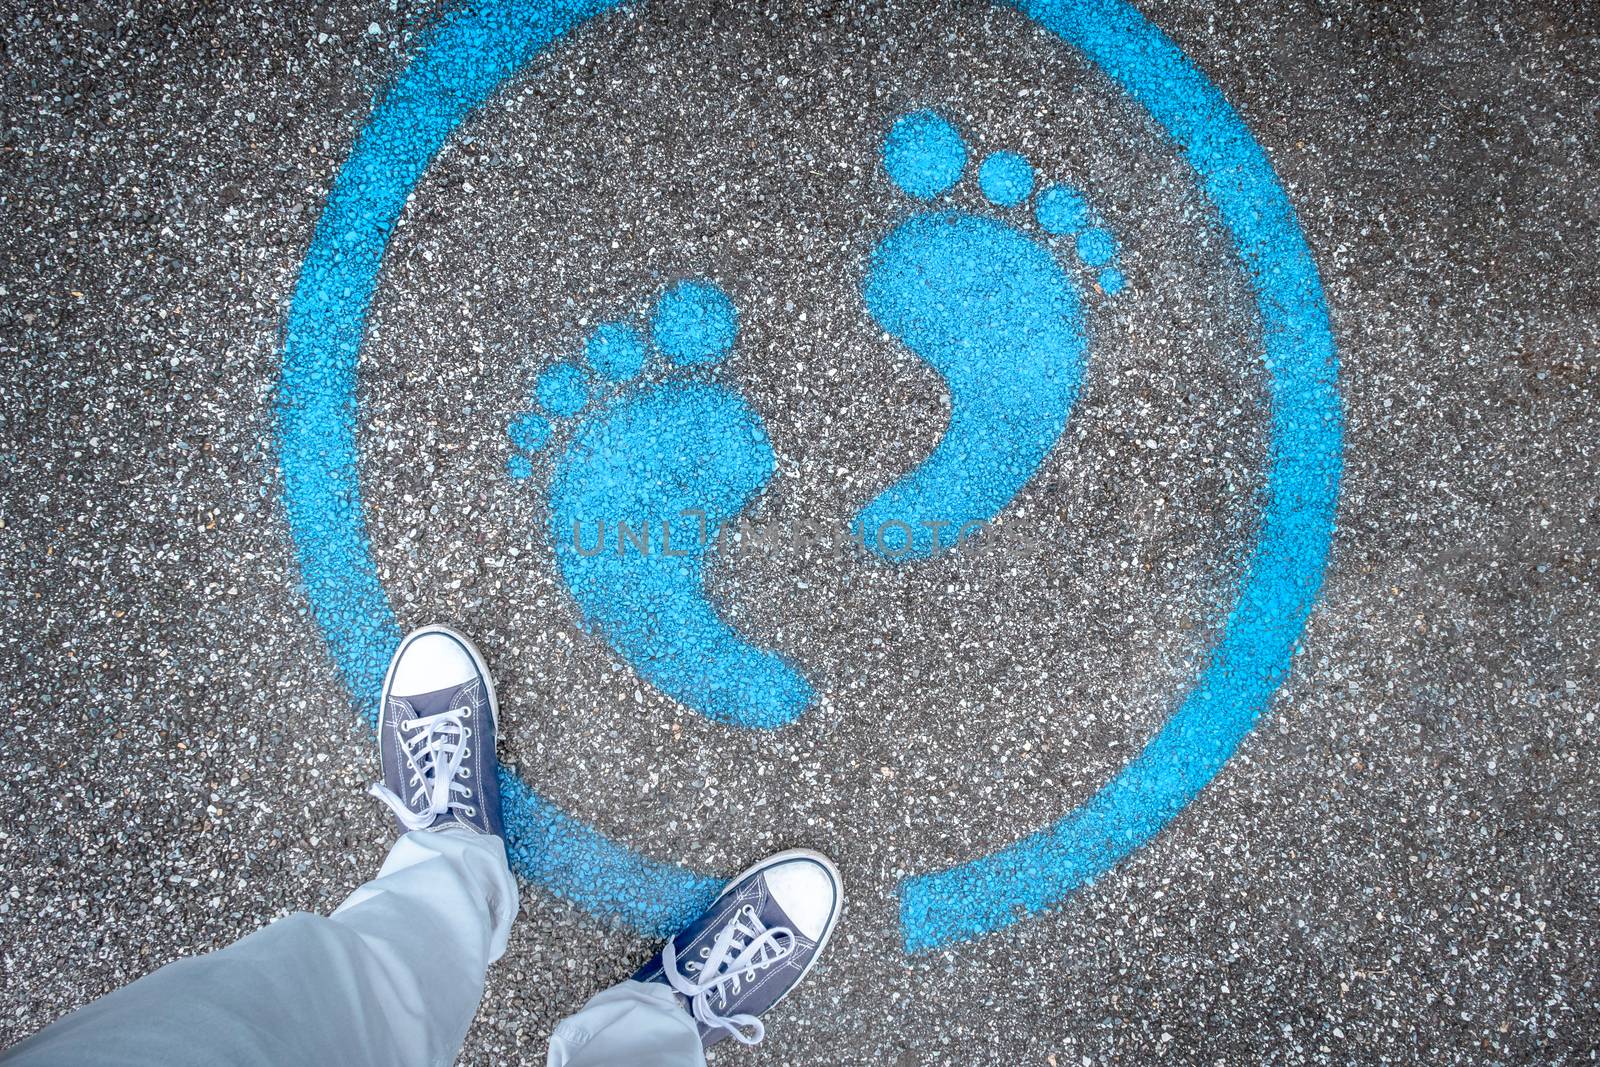 Man standing on blue dot. Sign painted on the pavement reminding users to maintain a physical distance of 3 feet / 1 meter during the COVID-19 pandemic.